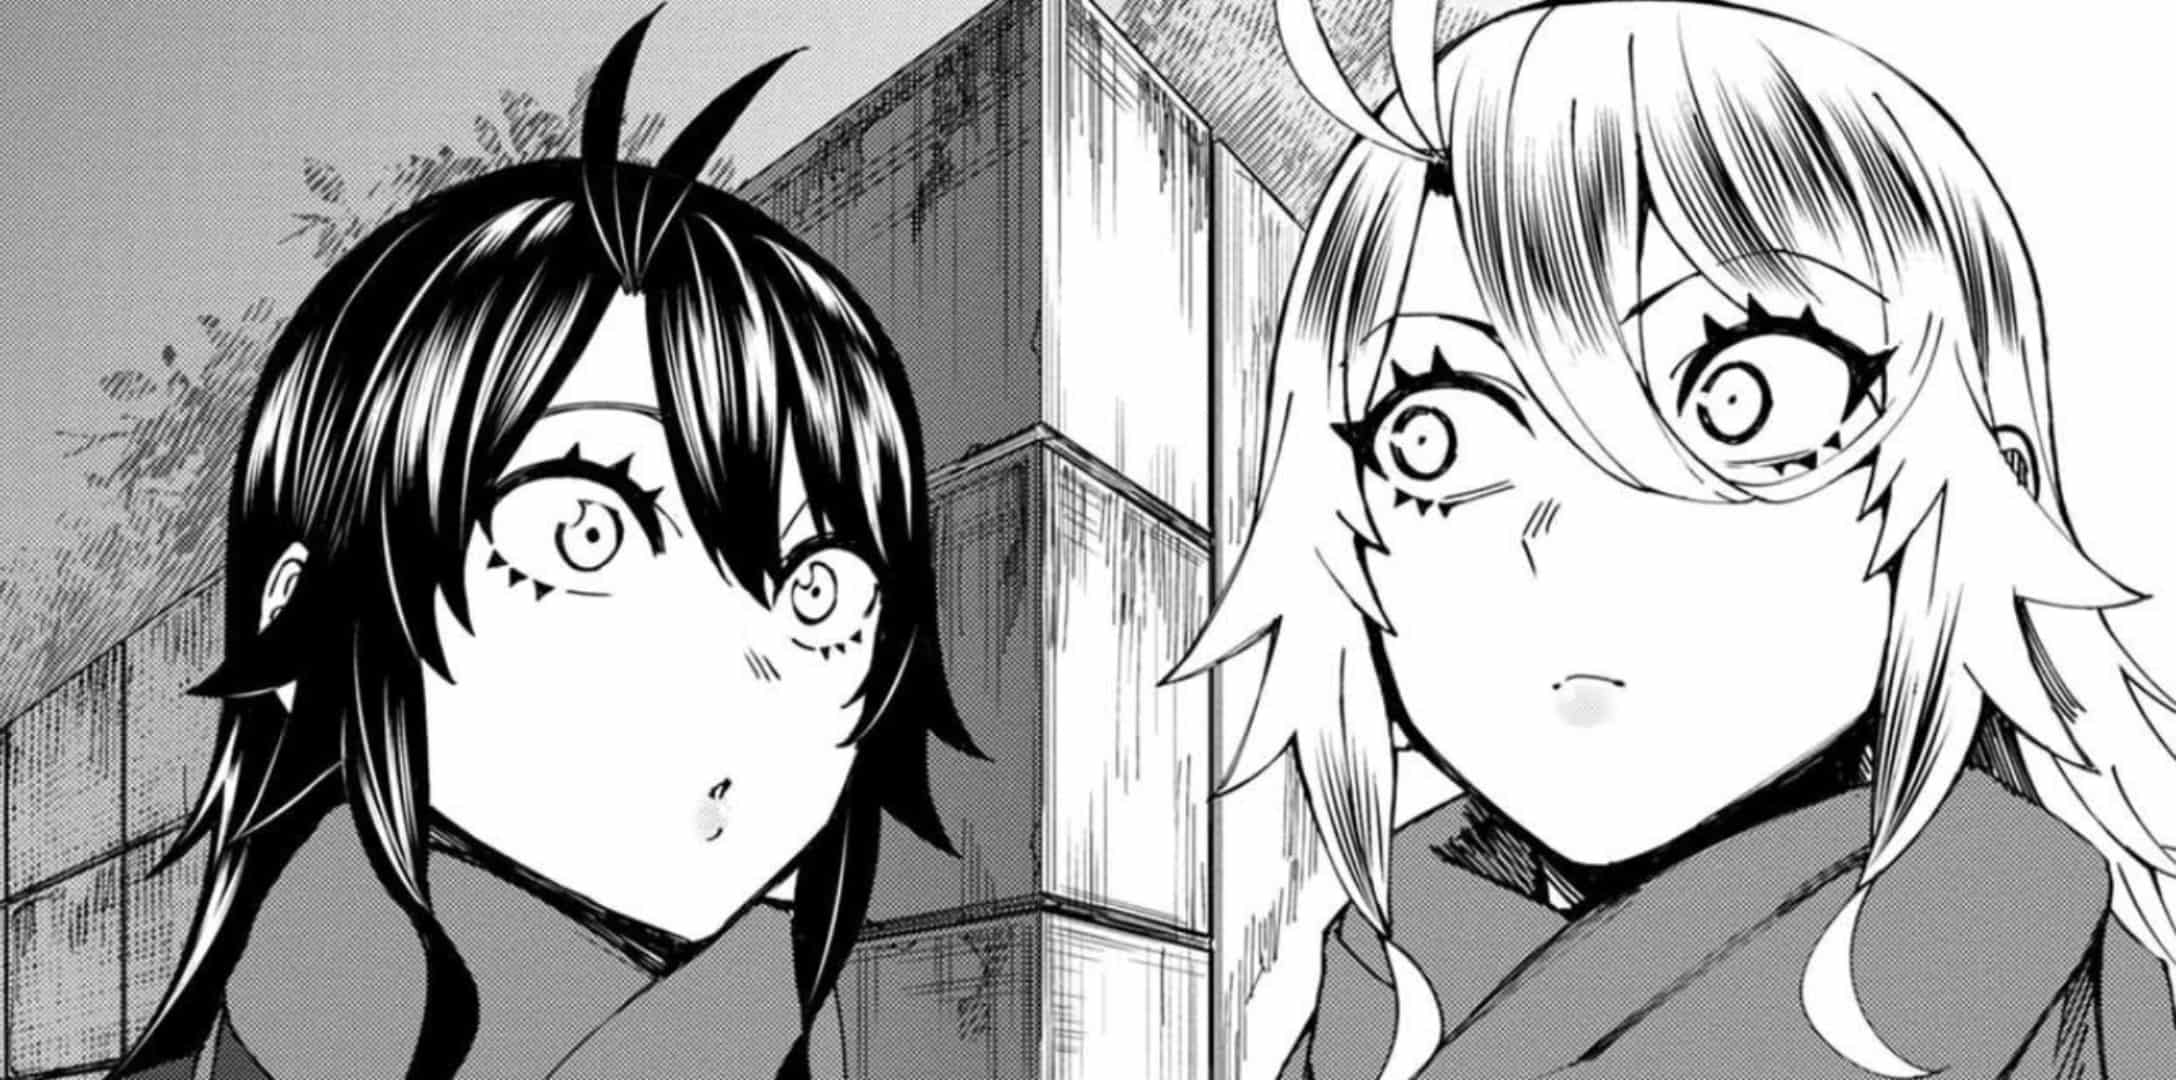 Reina and Reina from Bad Girl-Exorcist Reina chapter 62